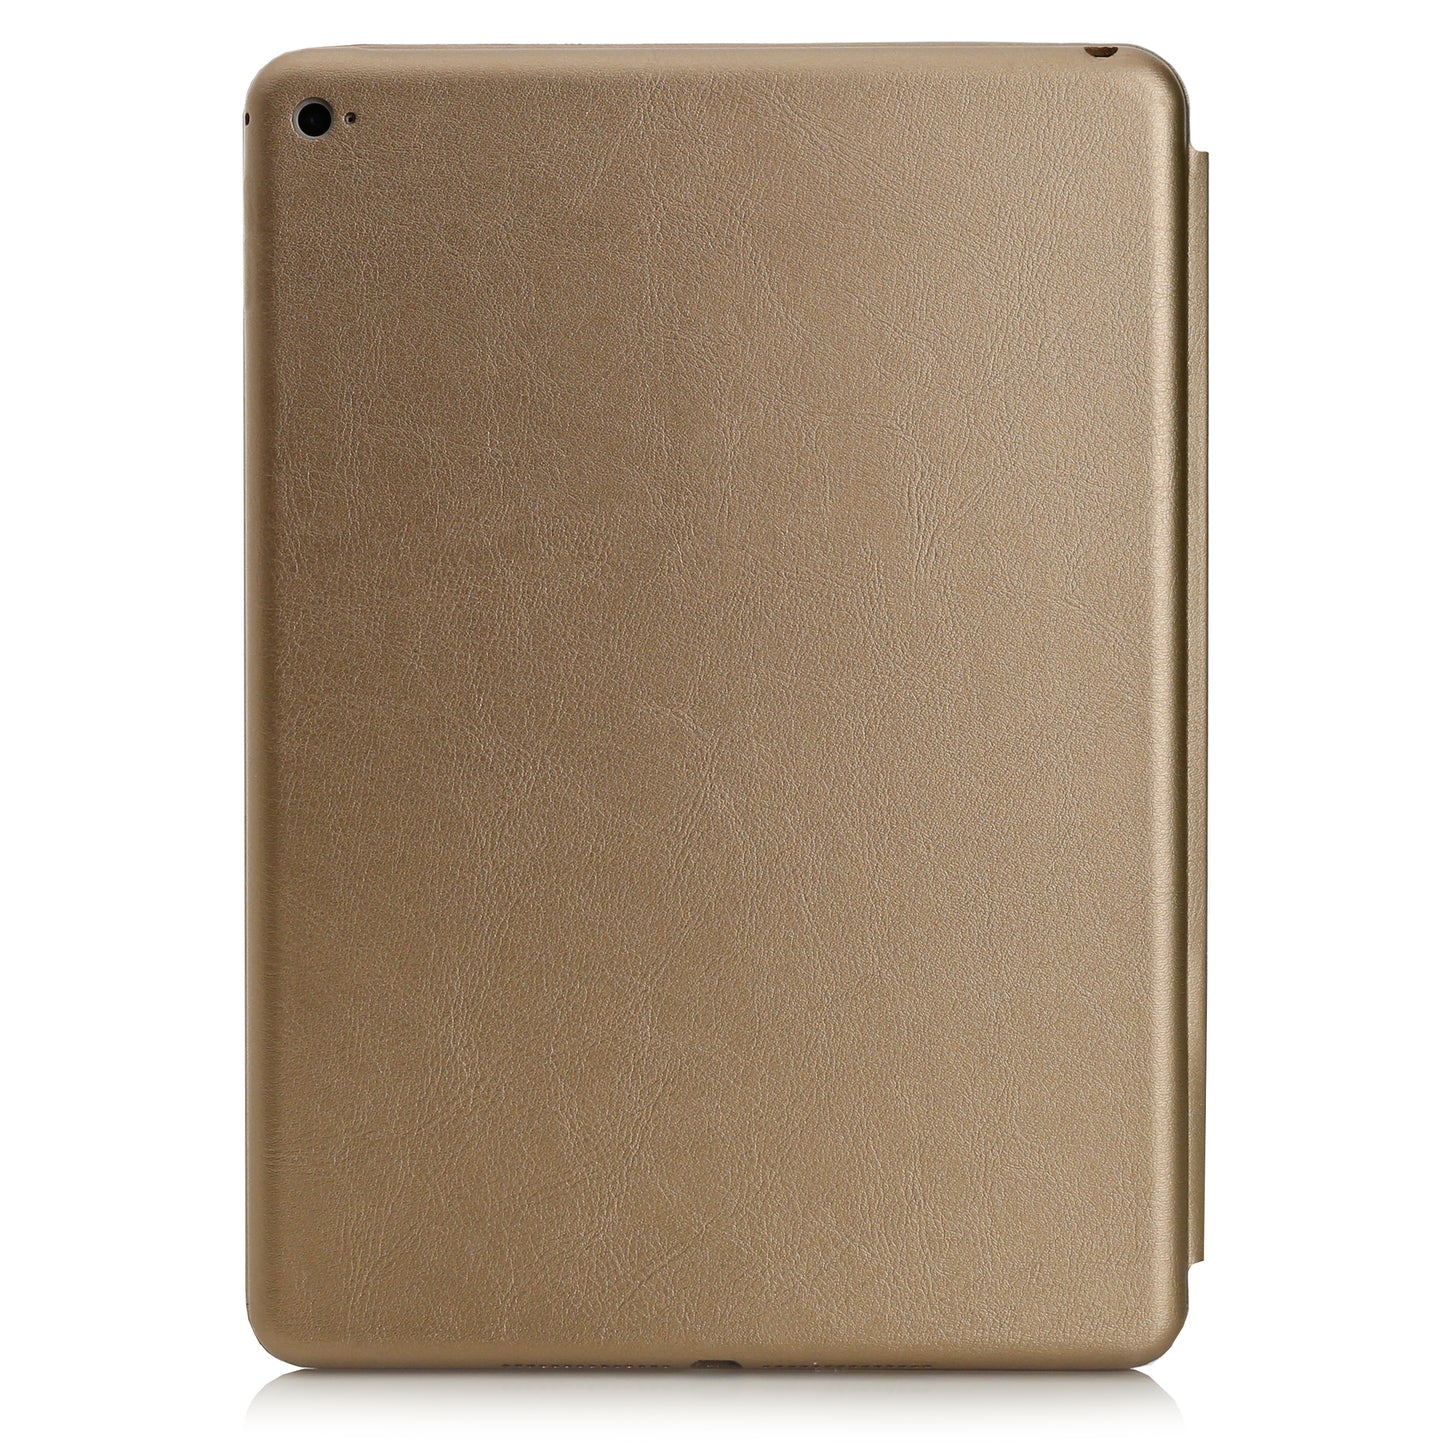 iCEO iPad Air 2 SmartCover Case